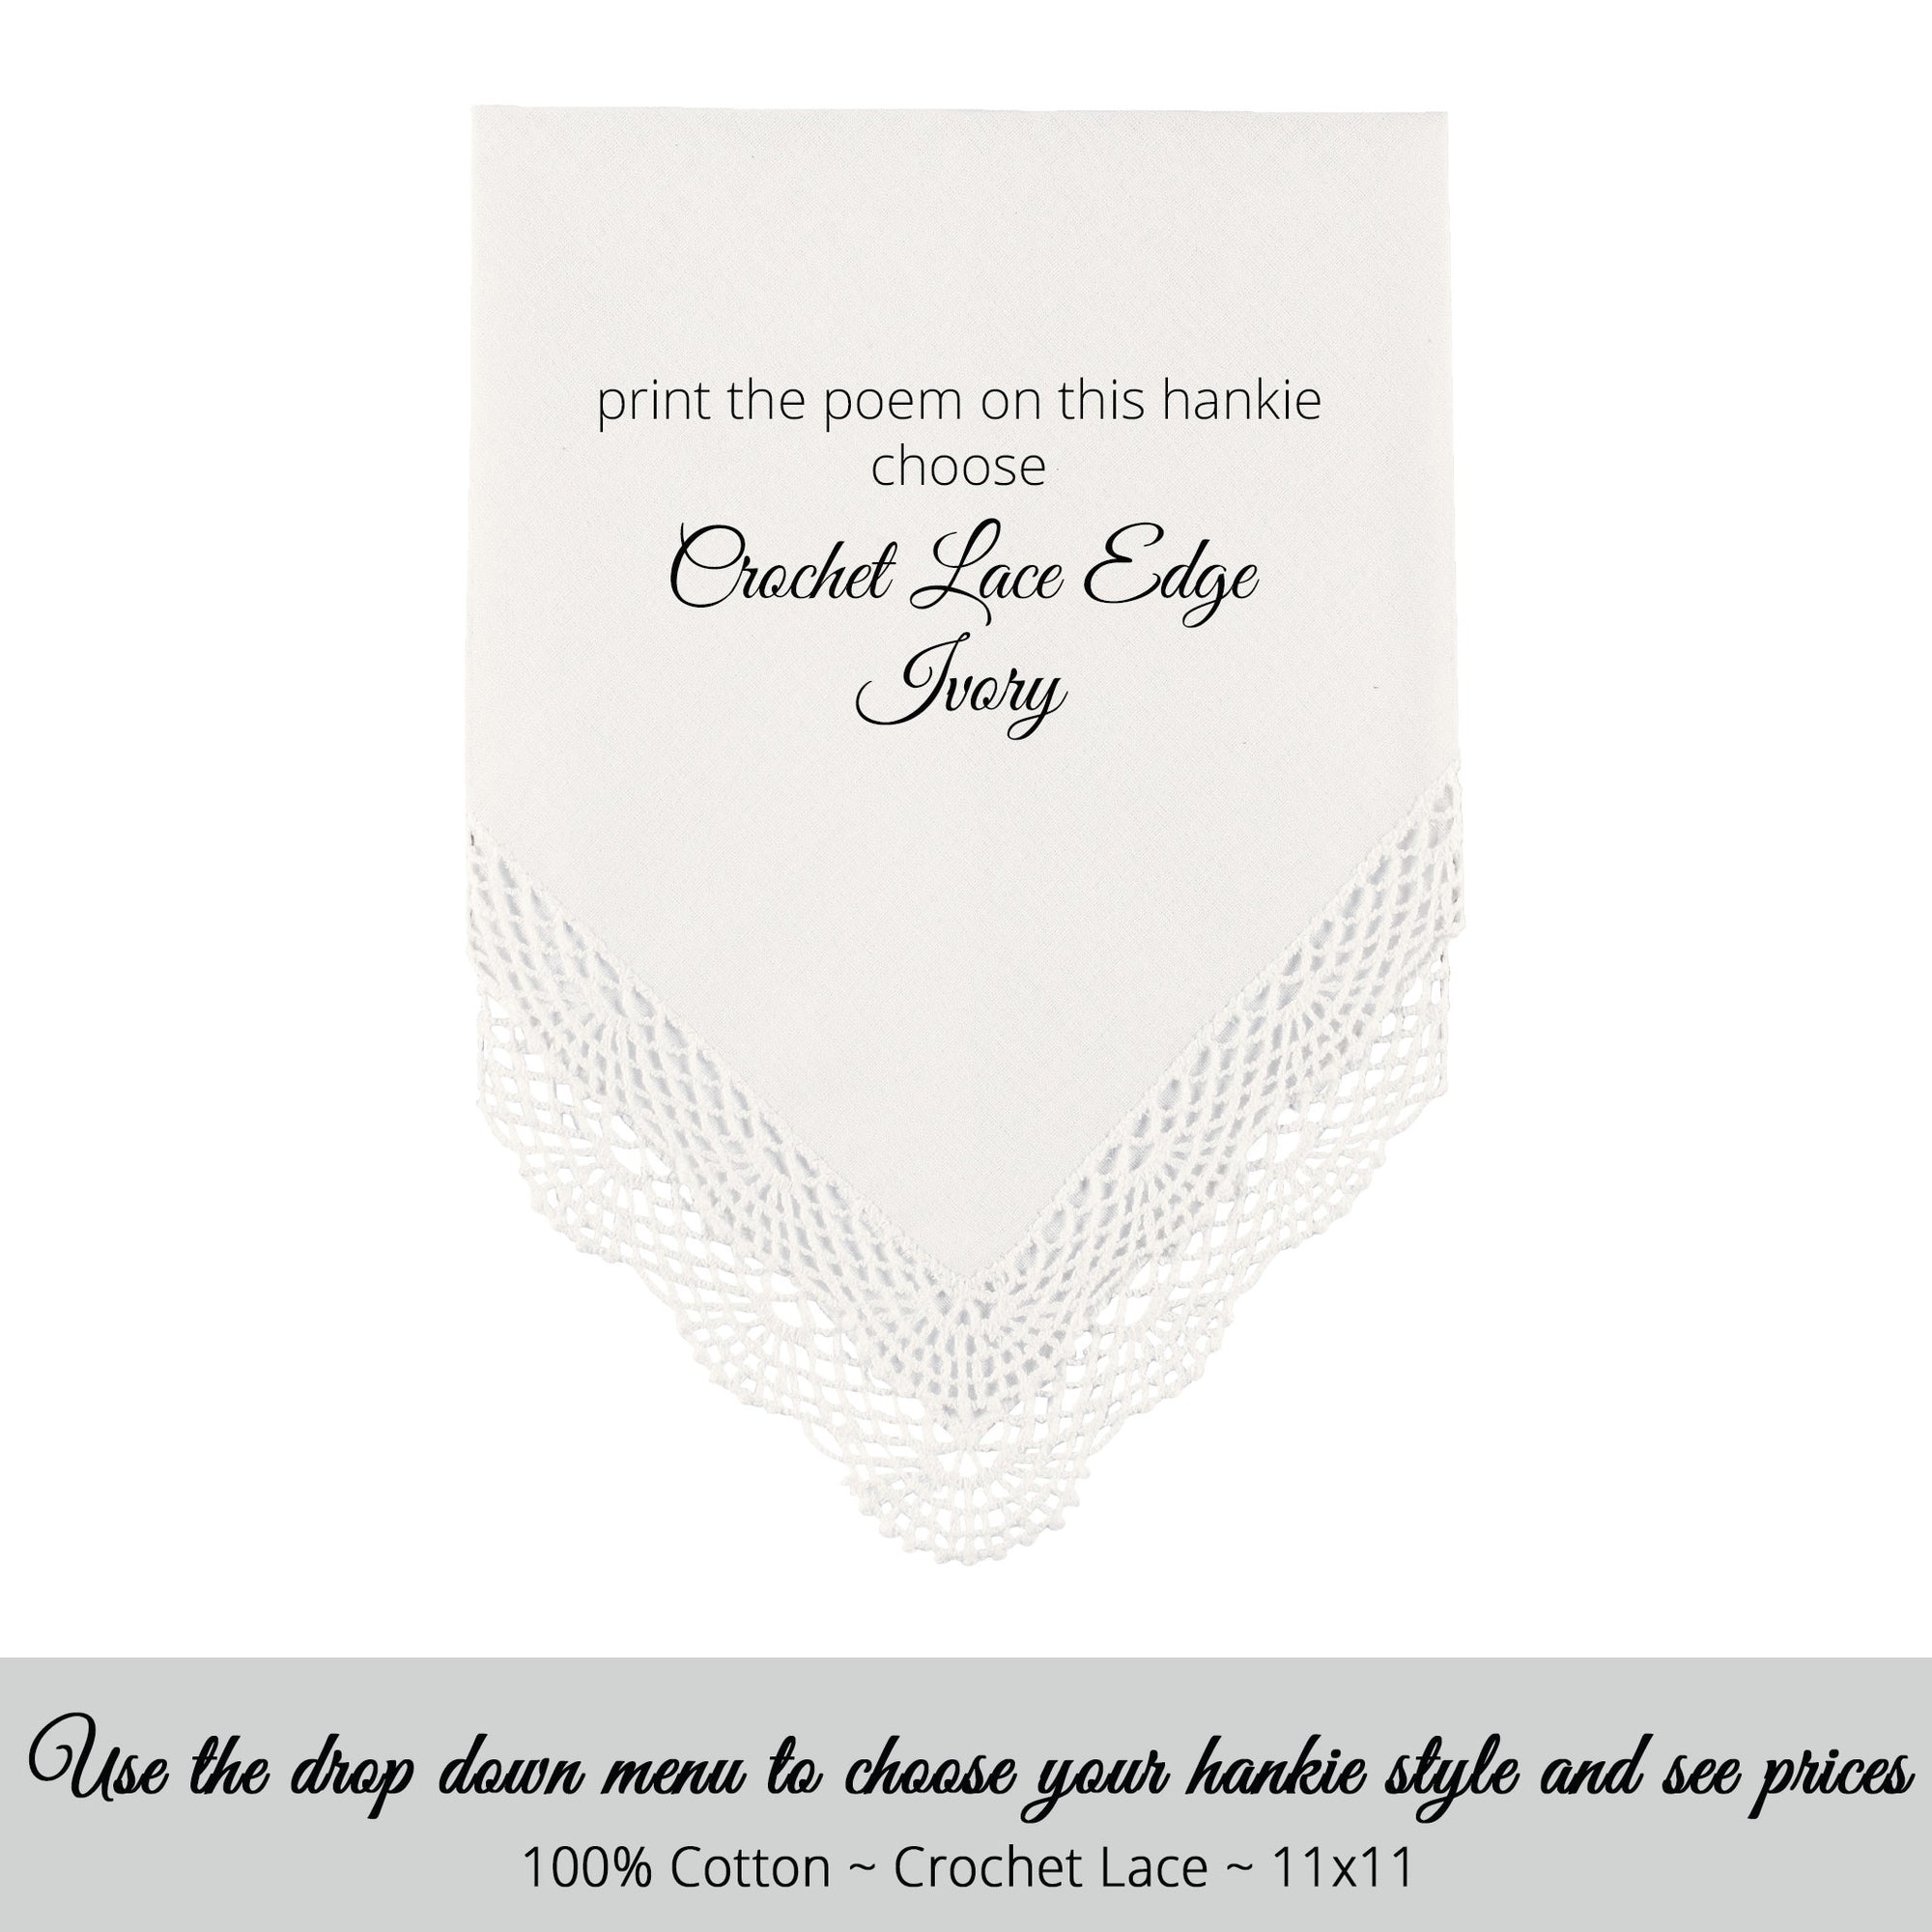 Wedding handkerchief ivory with crochet lace edge for the jr. bridesmaid. printed poem on hankie 